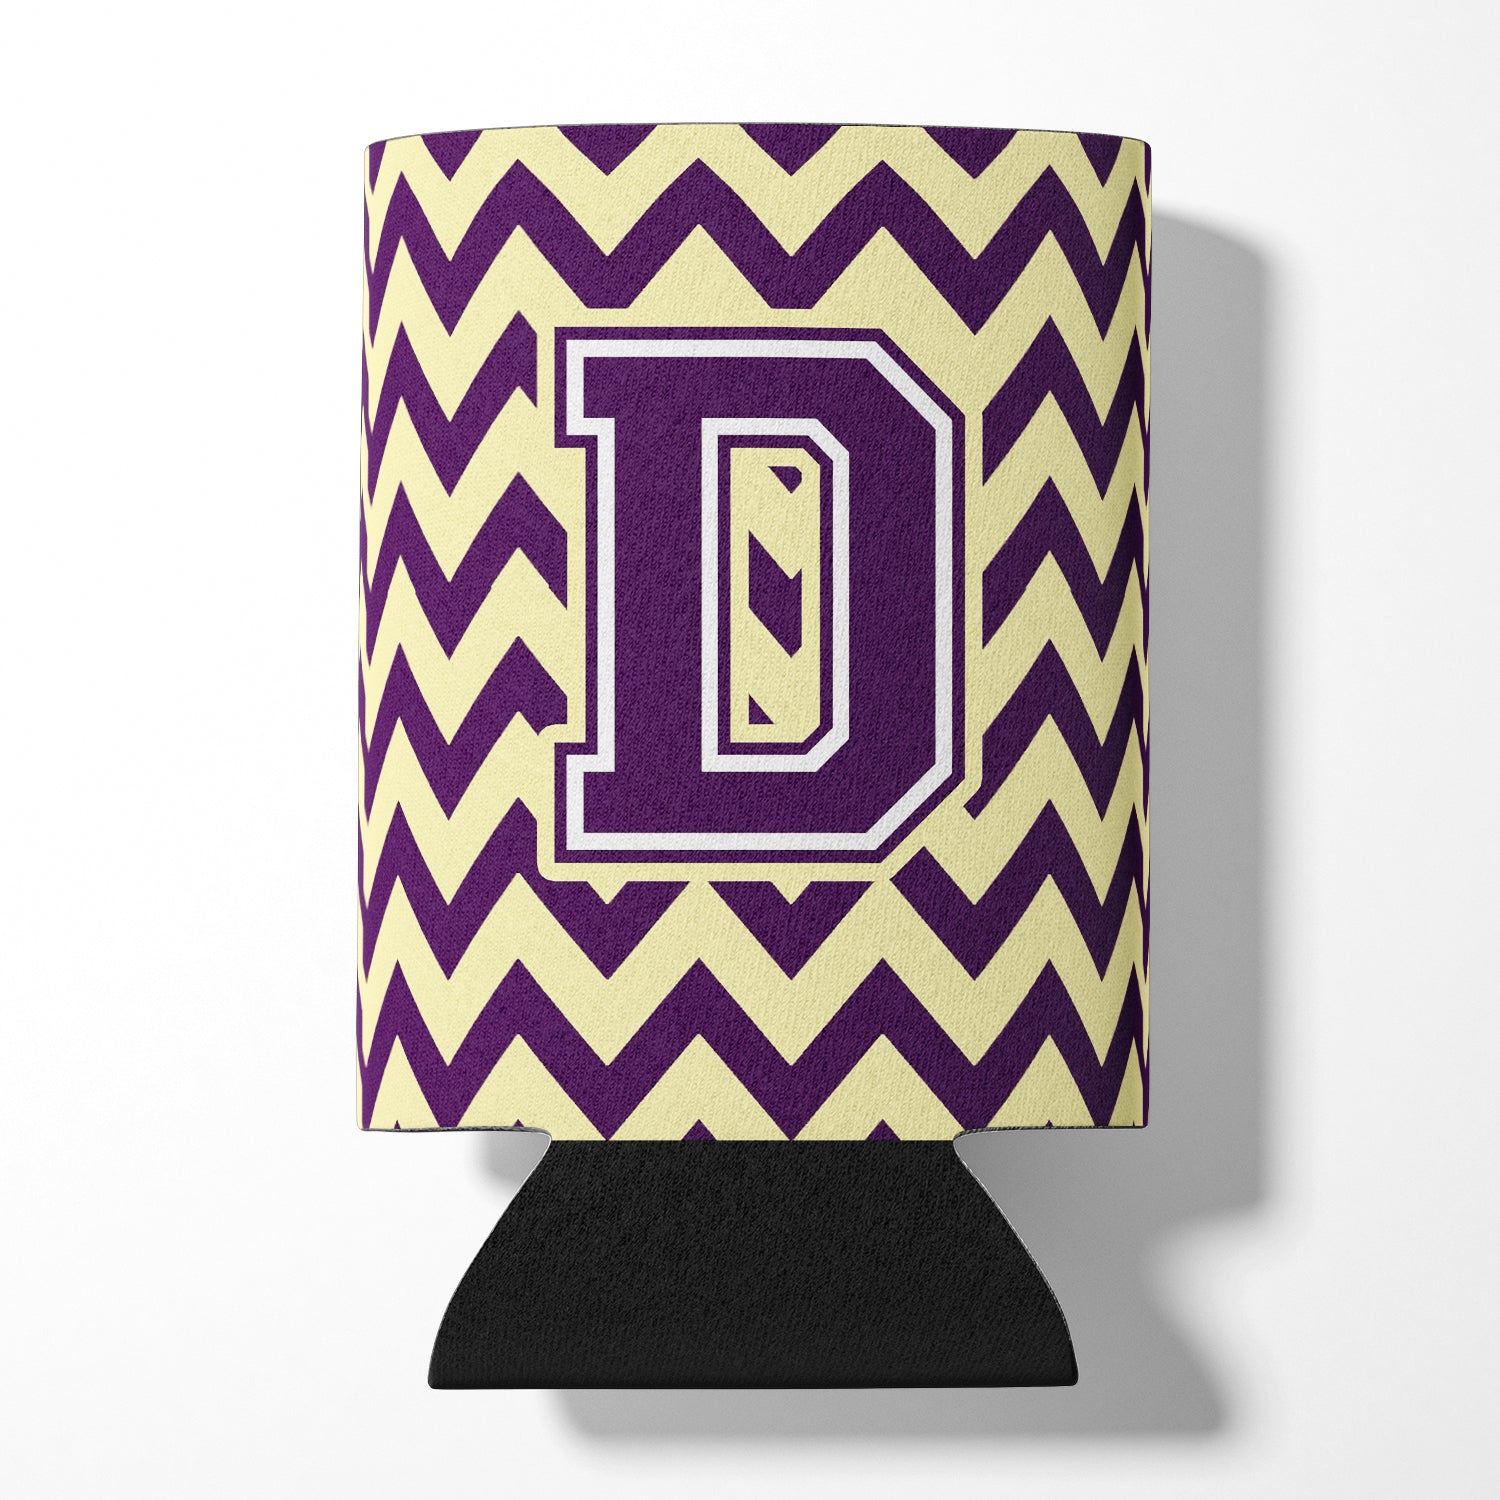 Letter D Chevron Purple and Gold Can or Bottle Hugger CJ1058-DCC